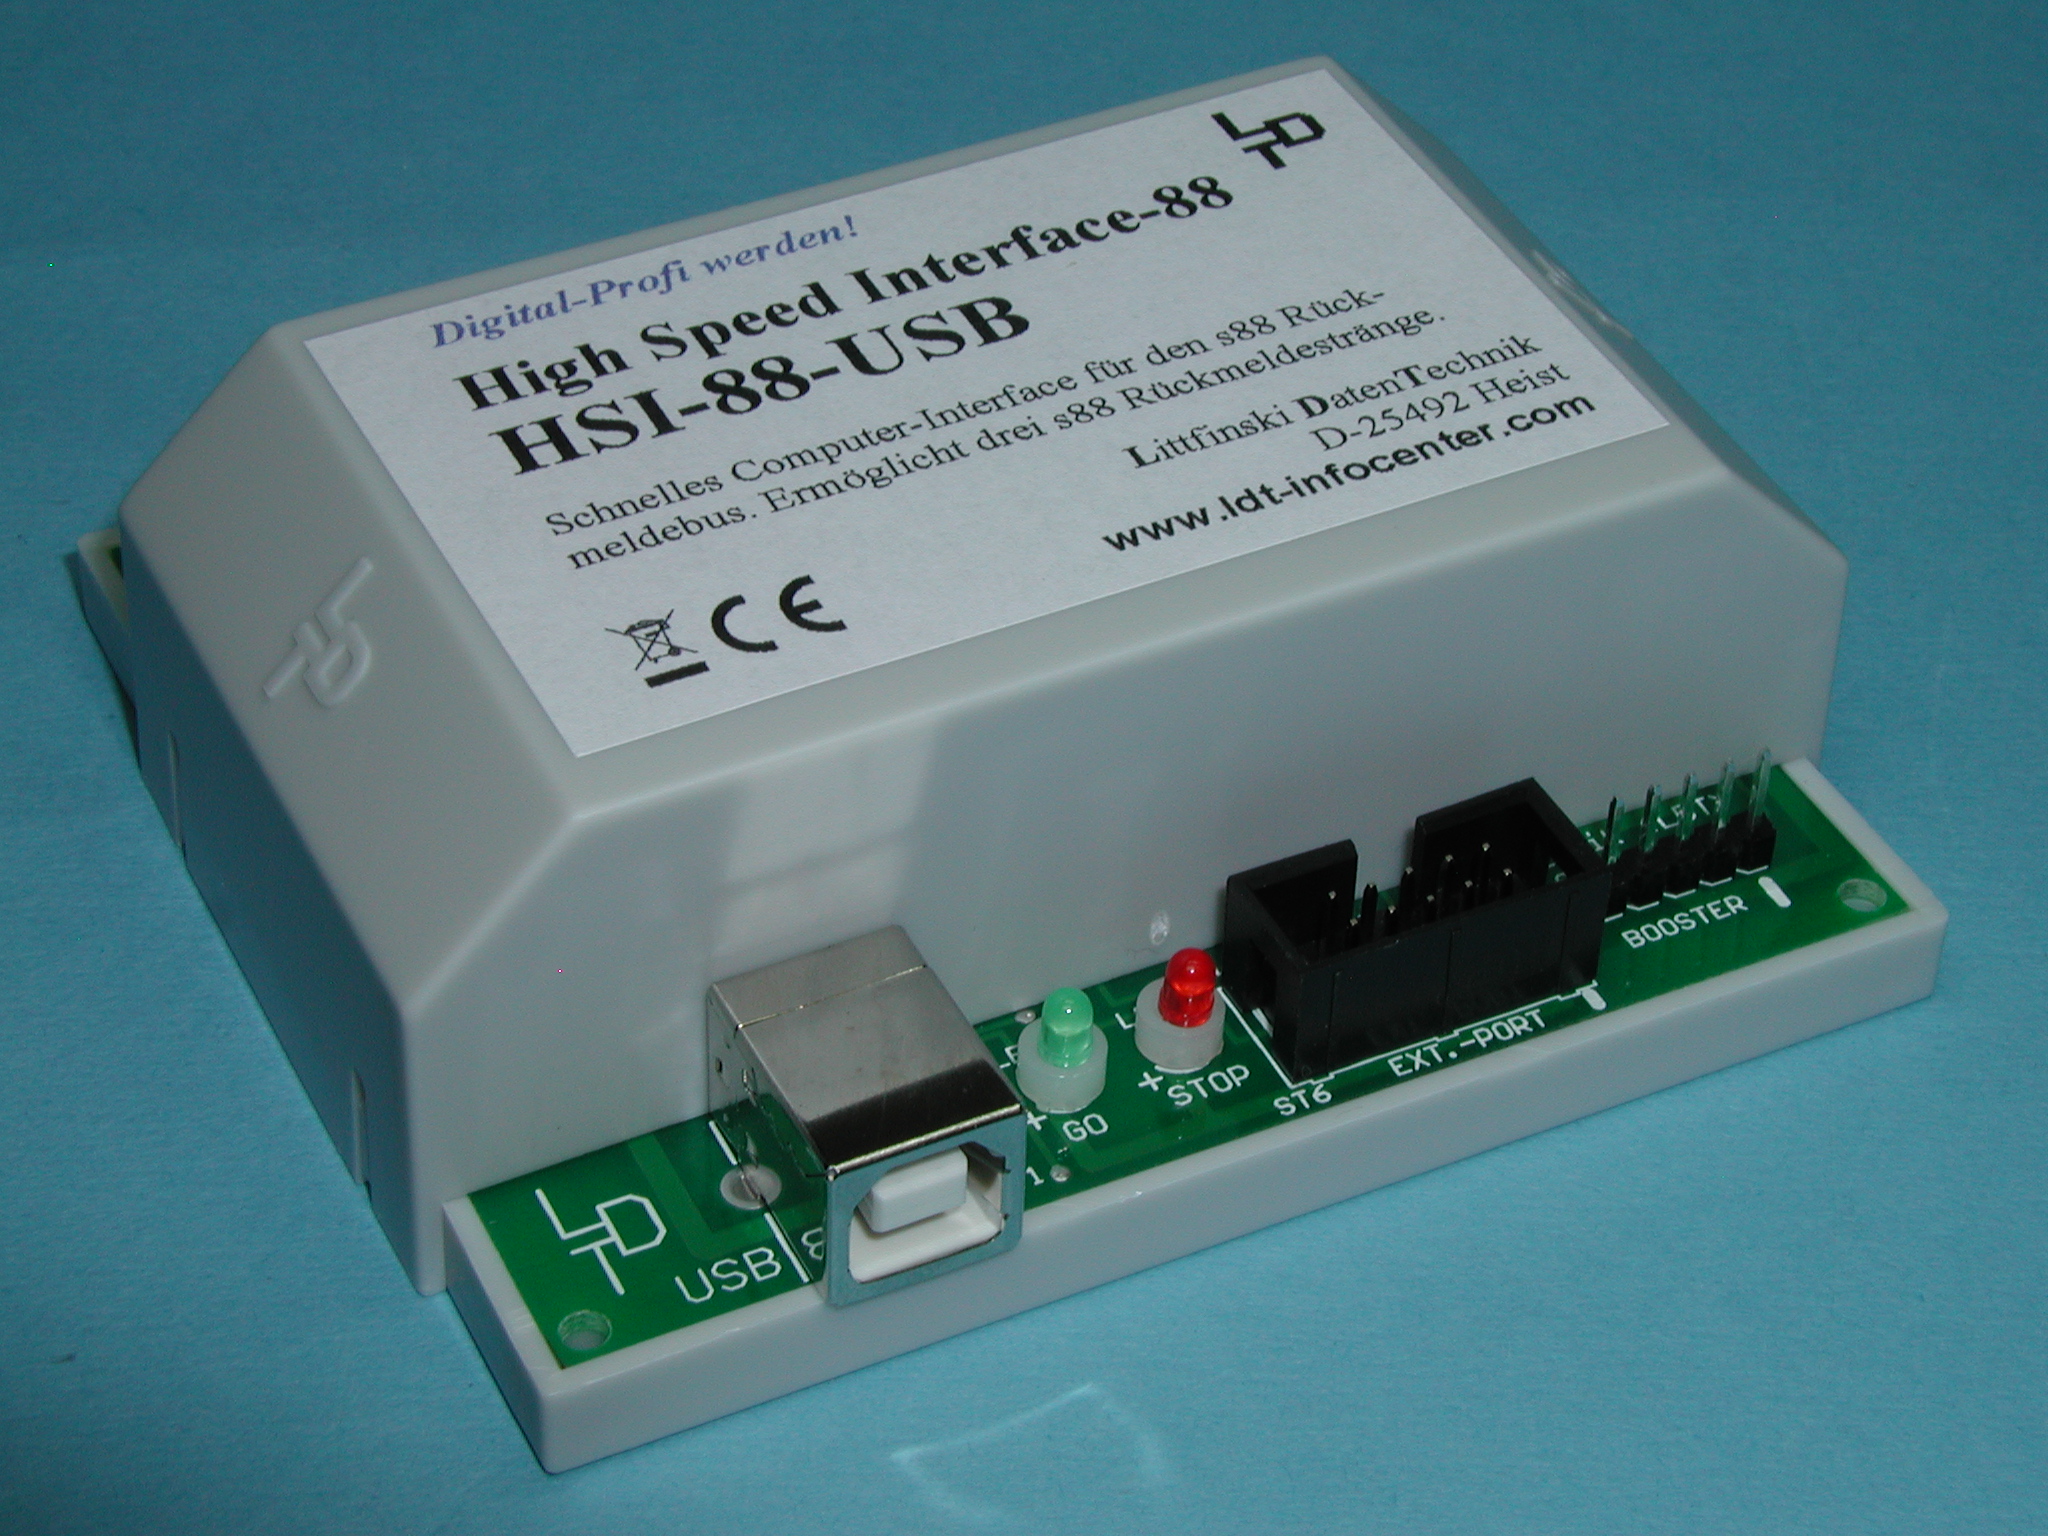 LDT WebShop HSI-88-USB-G (as finished module in ) | purchase online